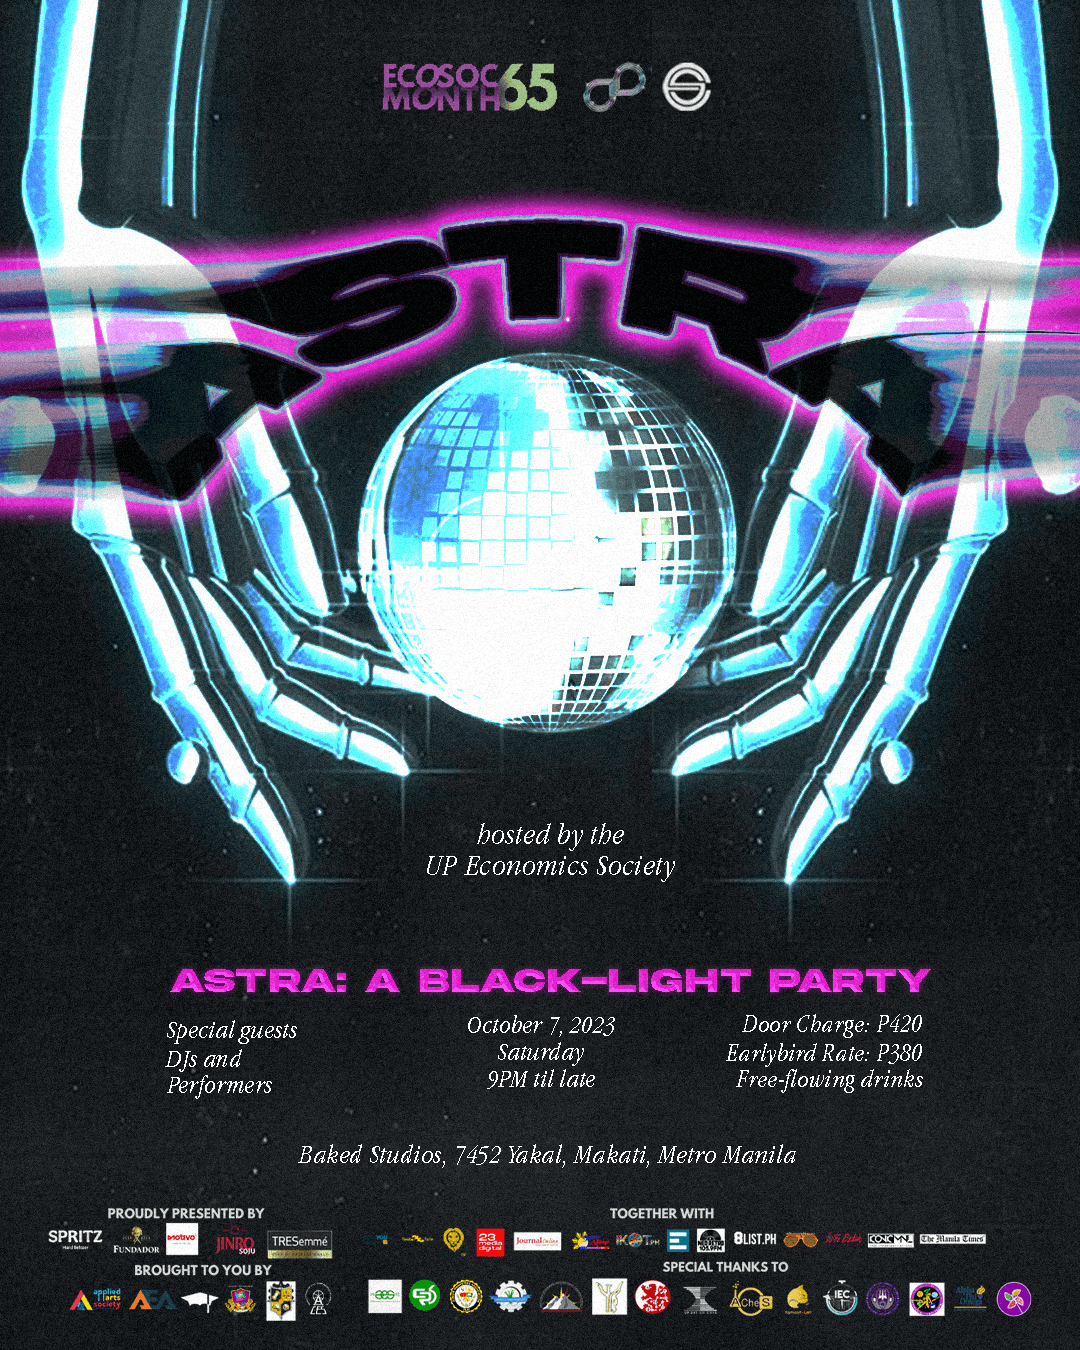 Glowing Bright at Astra: A Black-Light Party!